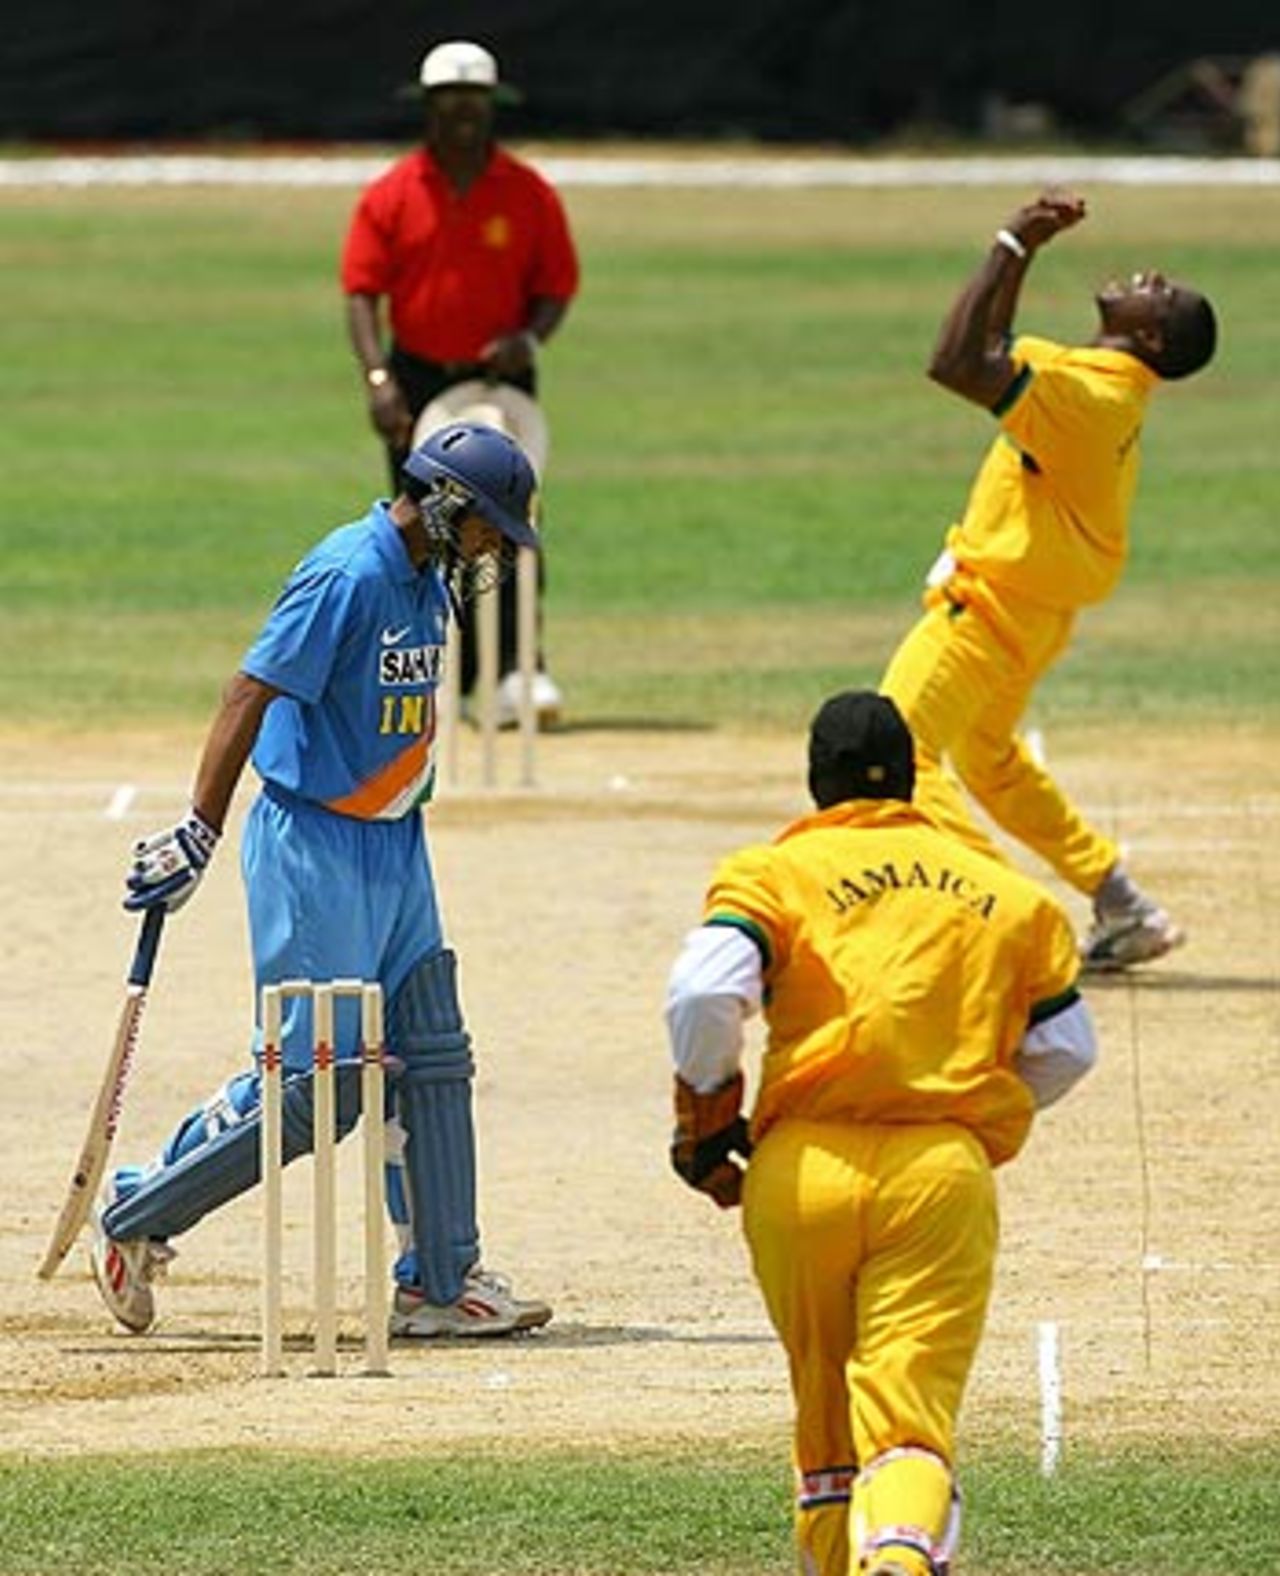 Andrew Richardson nails Rahul Dravid lbw during India's warm-up match against Jamaica, Jamaica v Indians, Montego Bay, May 16, 2006